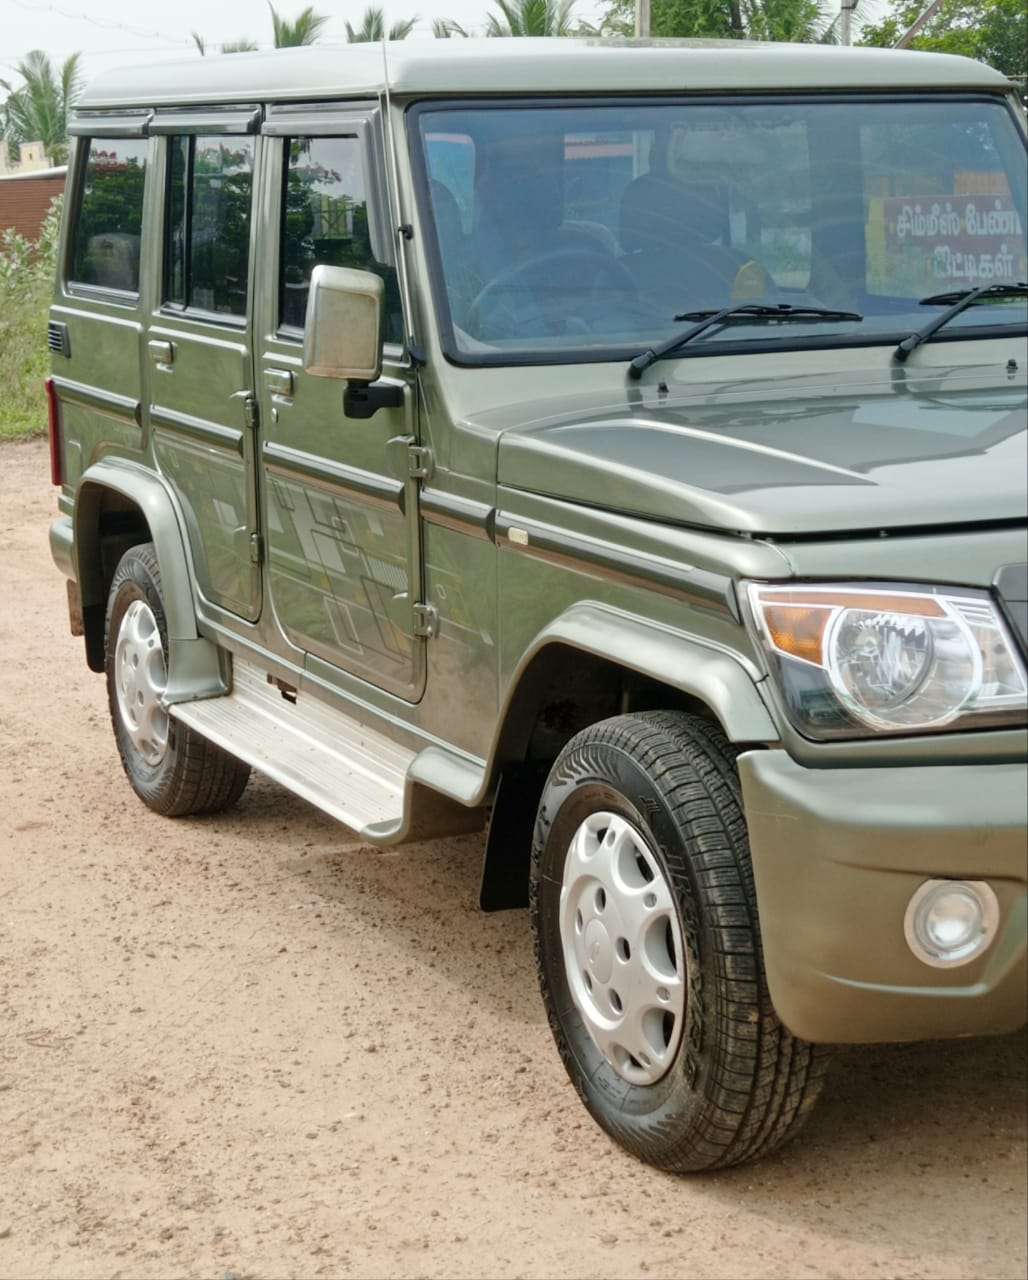 3334-for-sale-Mahindra-Bolero-Diesel-First-Owner-2012-TN-registered-rs-585000